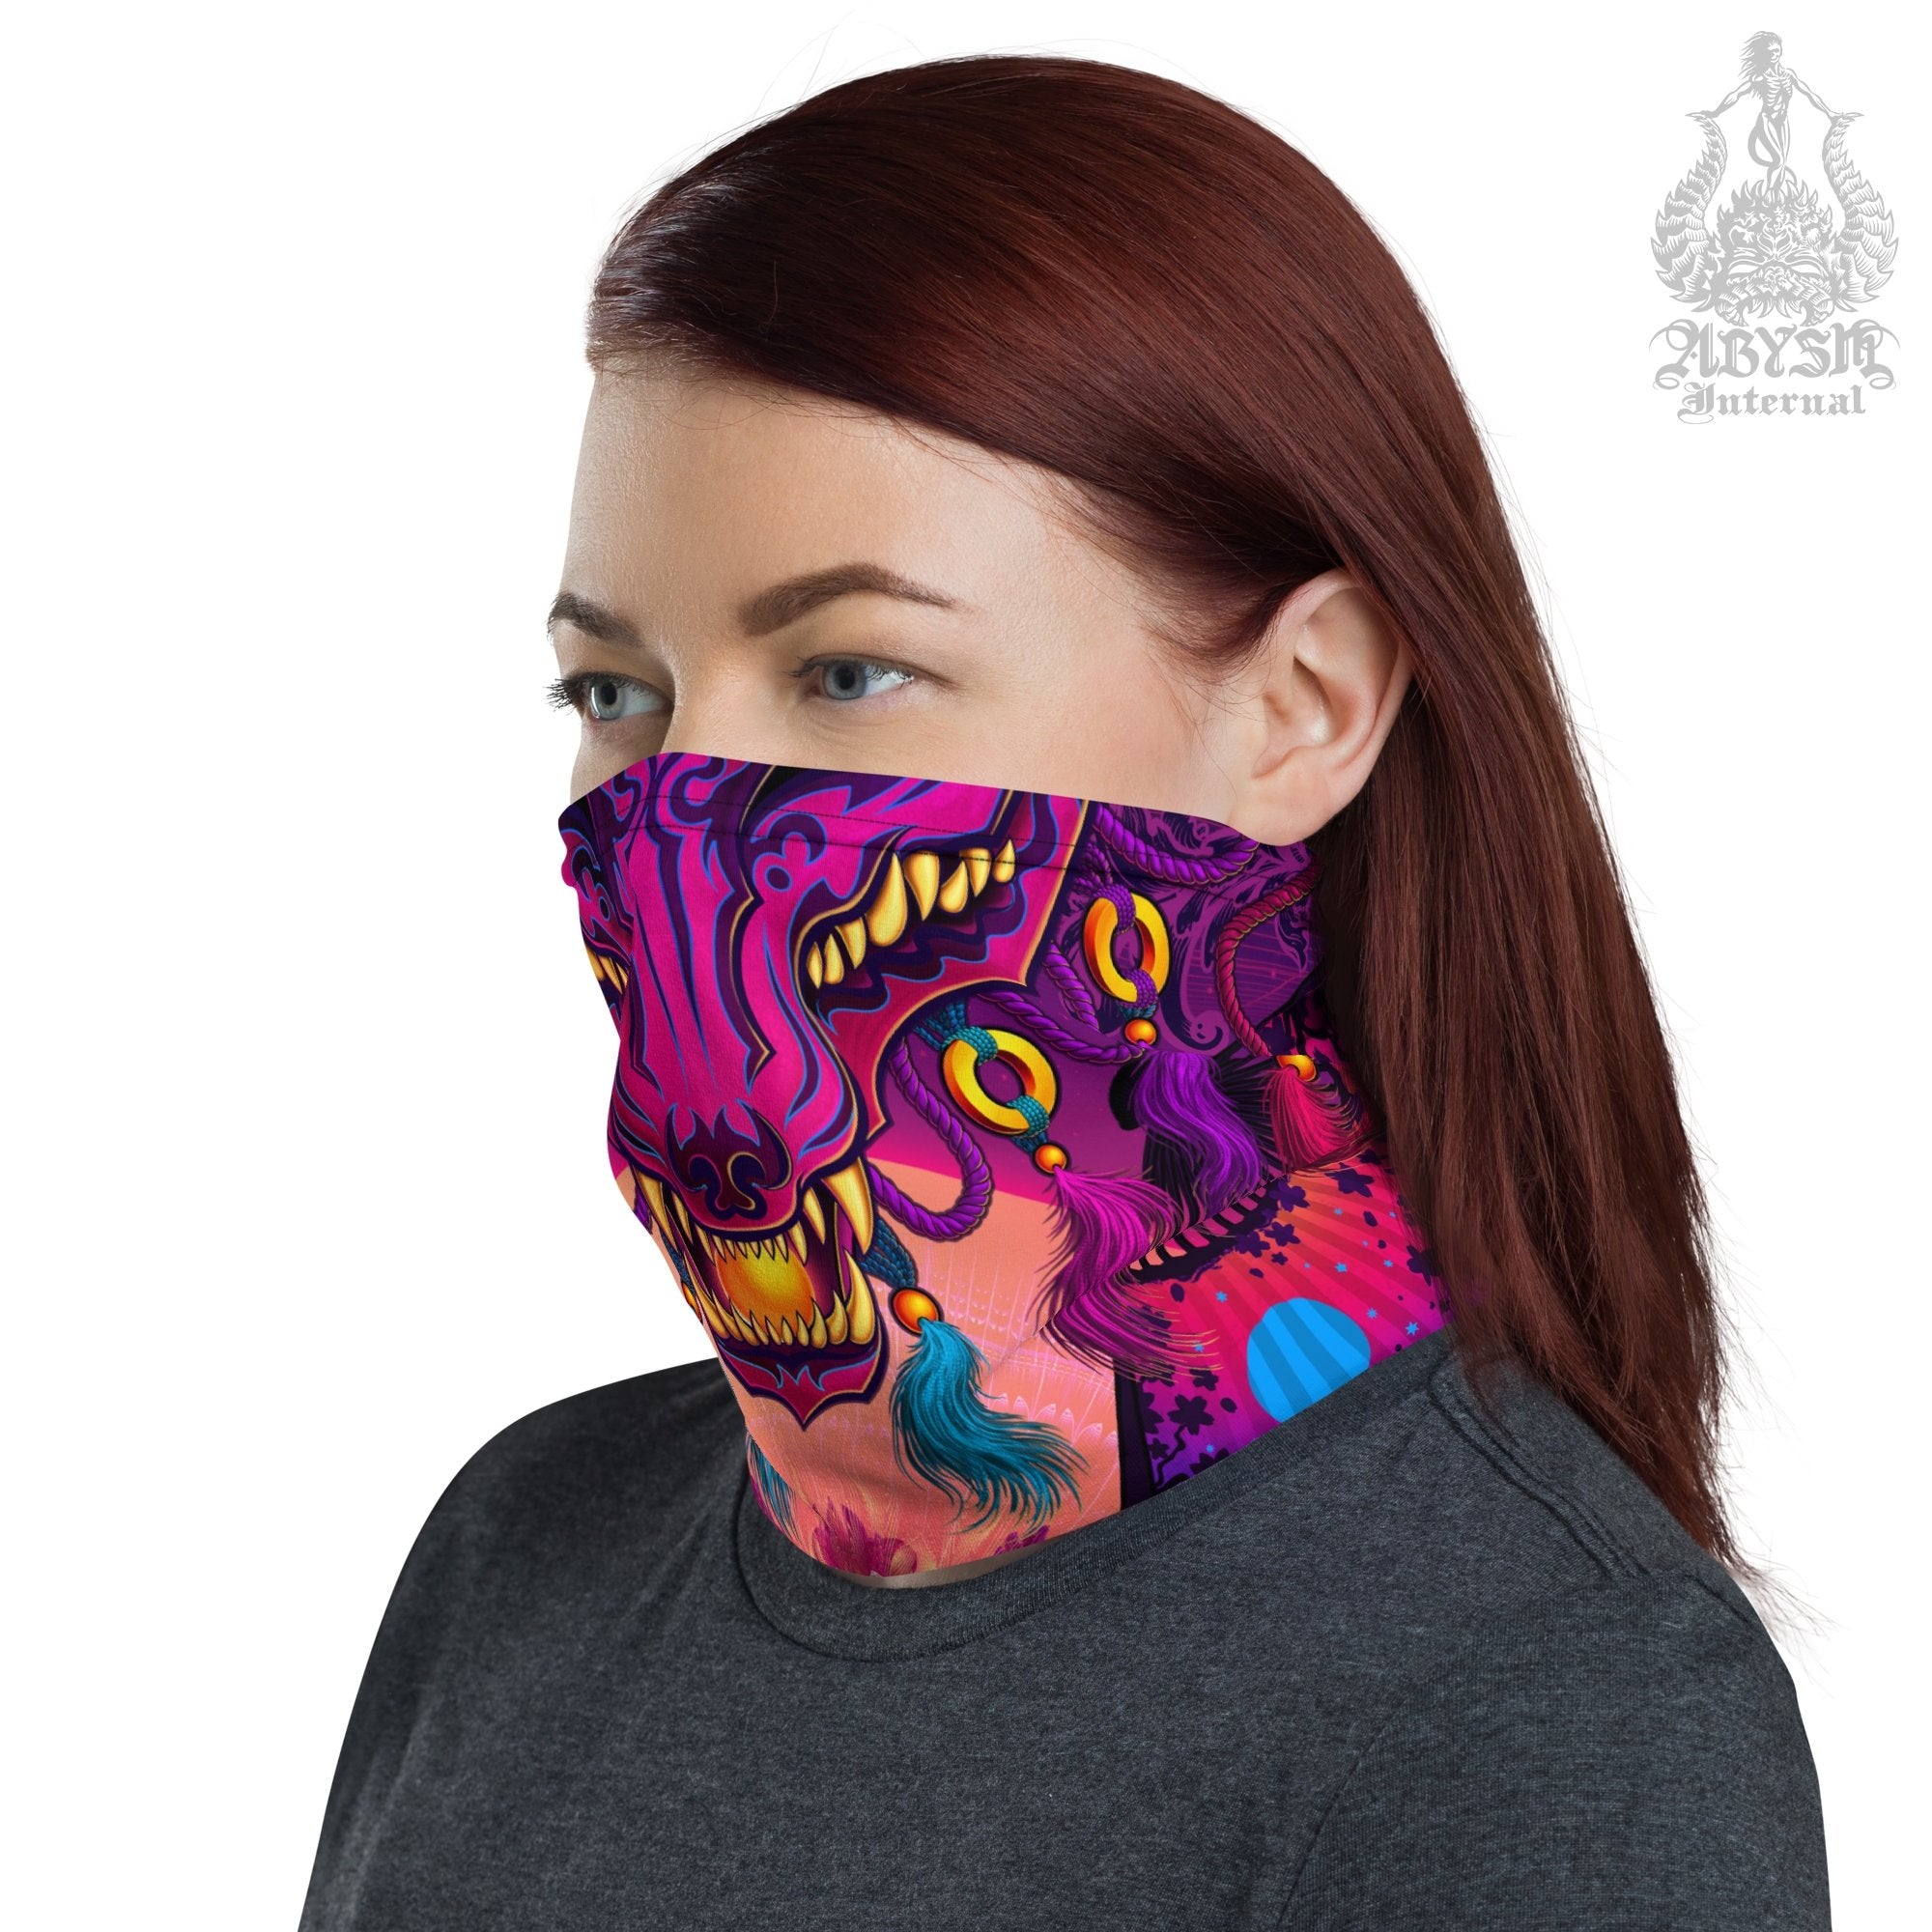 Japanese Vaporwave Neck Gaiter, Face Mask, Synthwave Head Covering, Psychedelic 80s Retrowave, Anime and Manga Convention or Outfit - Kitsune Fox - Abysm Internal